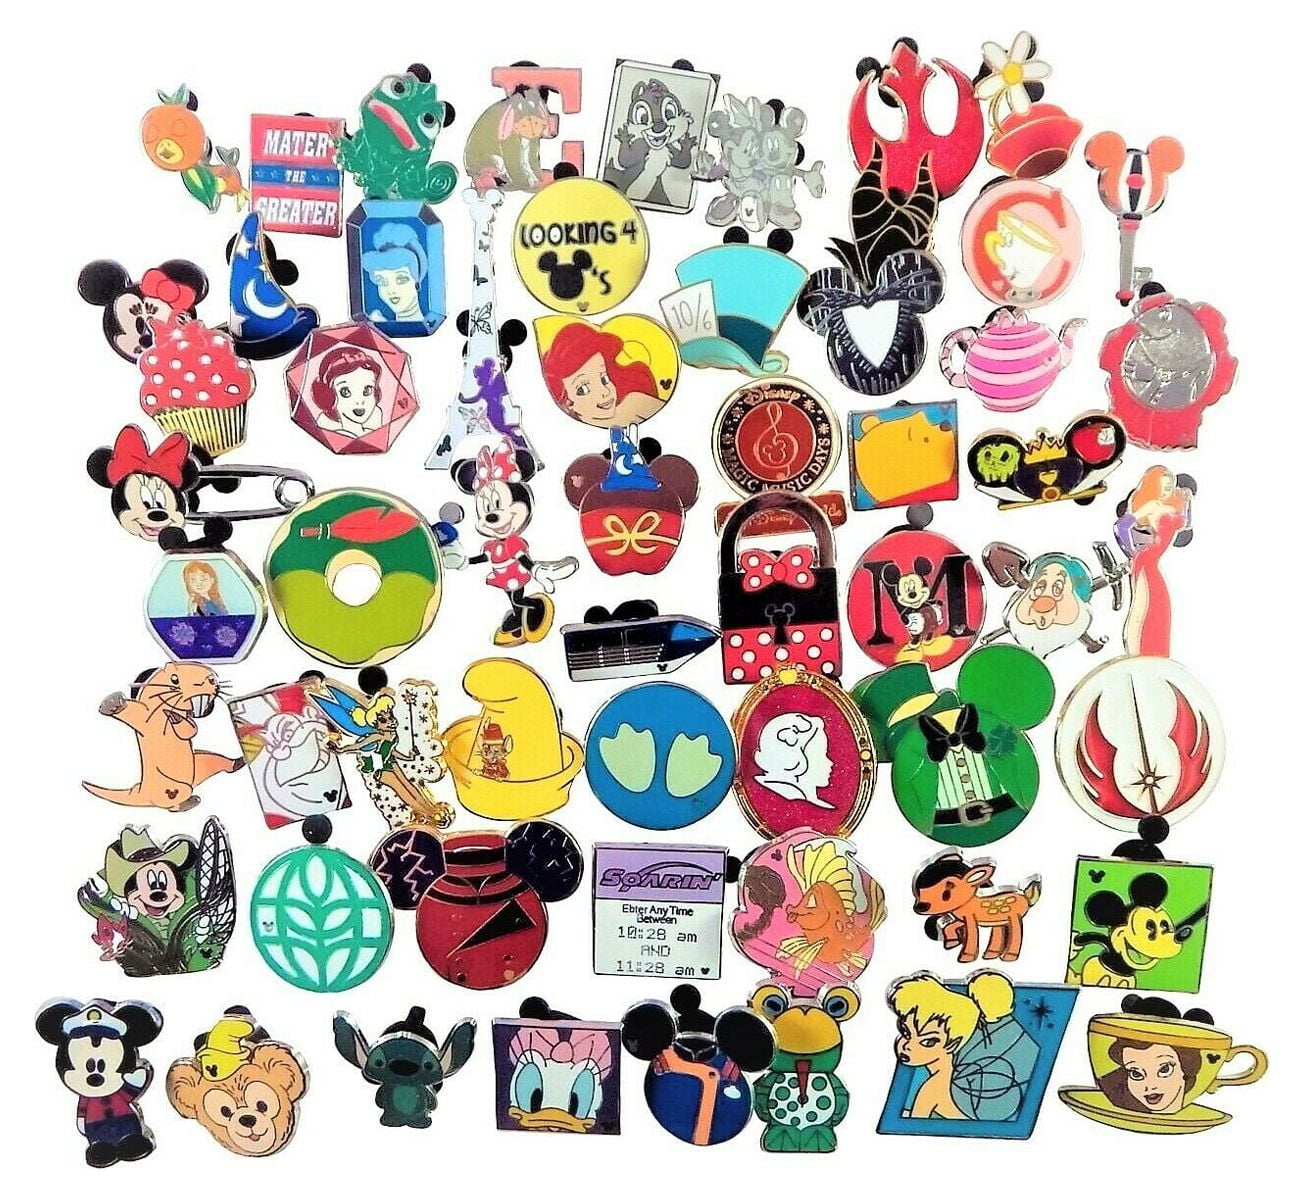 Disney Pin Trading 25 Assorted Pin Lot Brand New Pins No Doubles Tradable